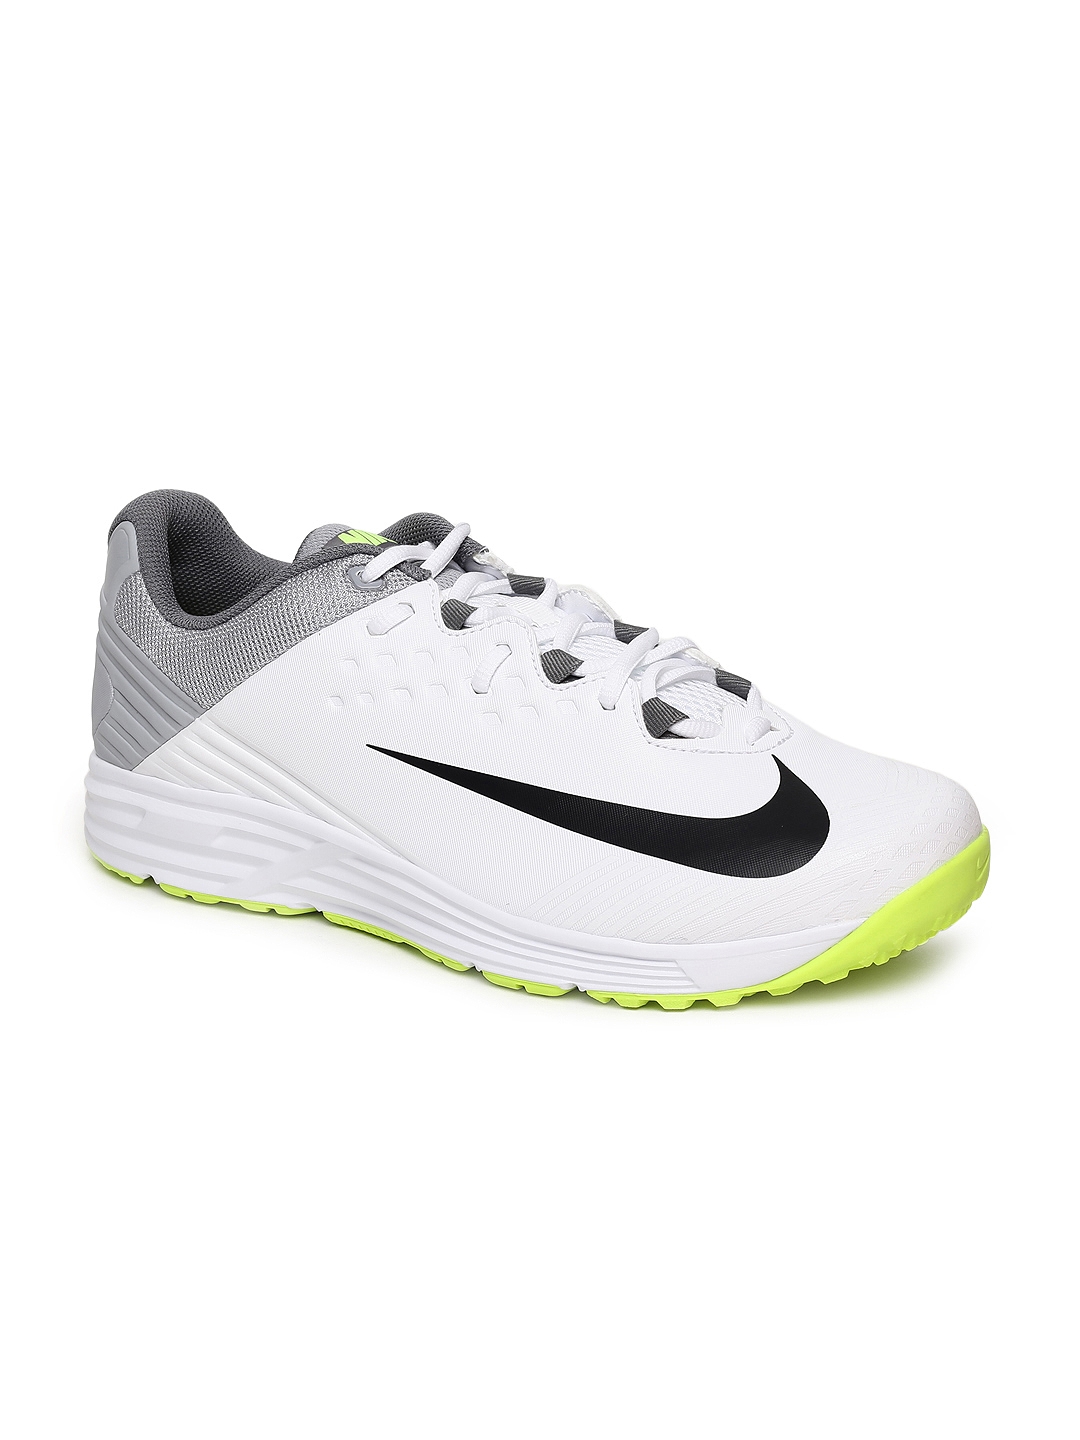 nike potential 3 cricket shoes